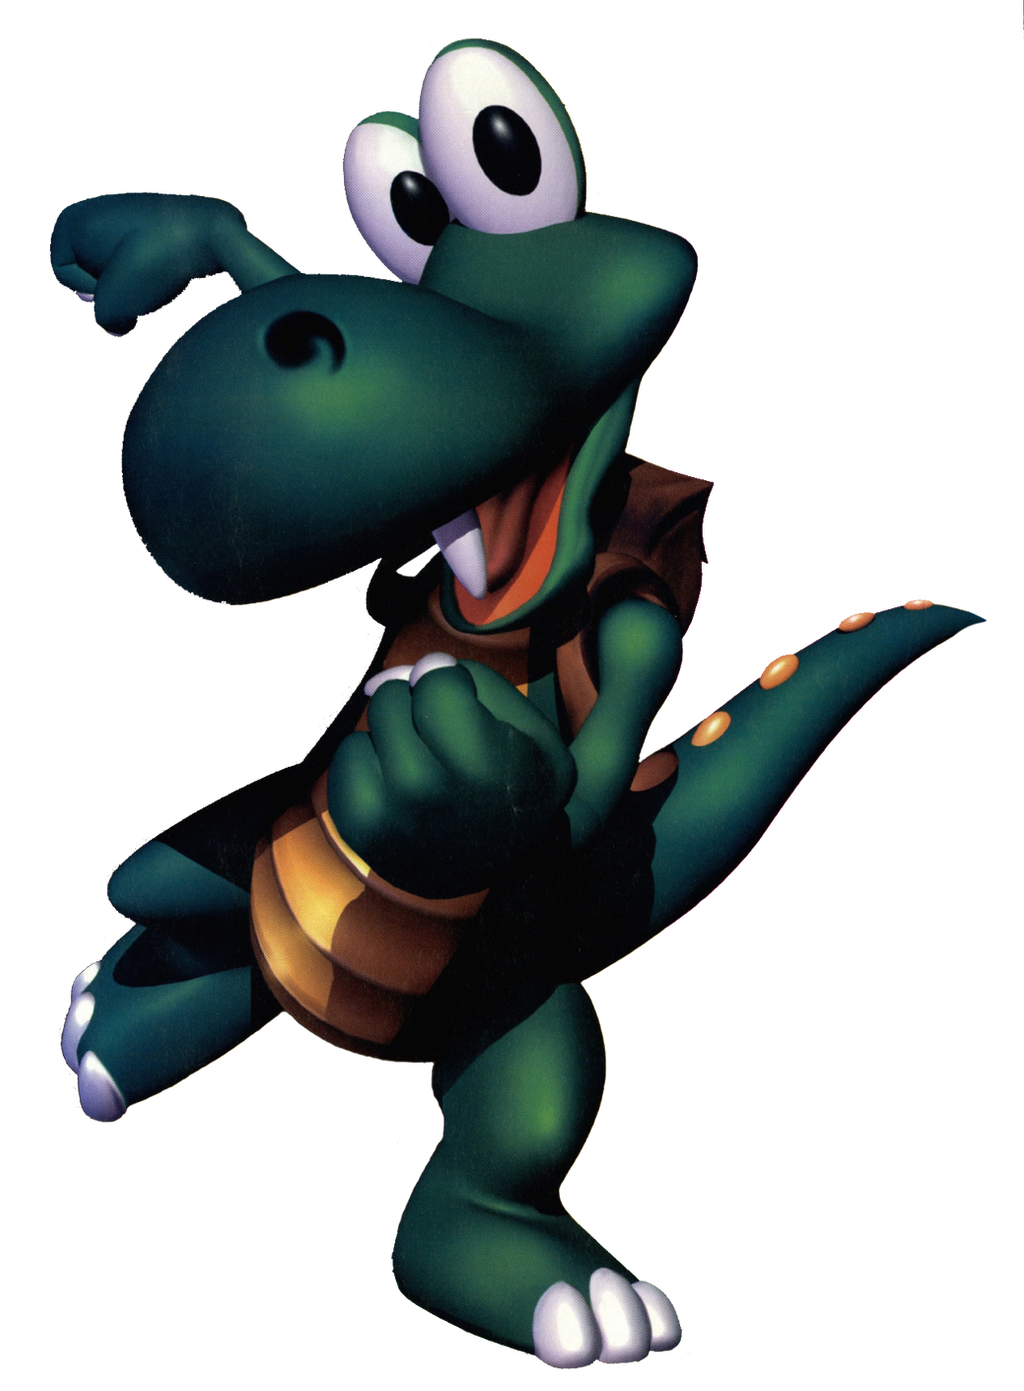 Croc: Legend of the Gobbos - Wikipedia